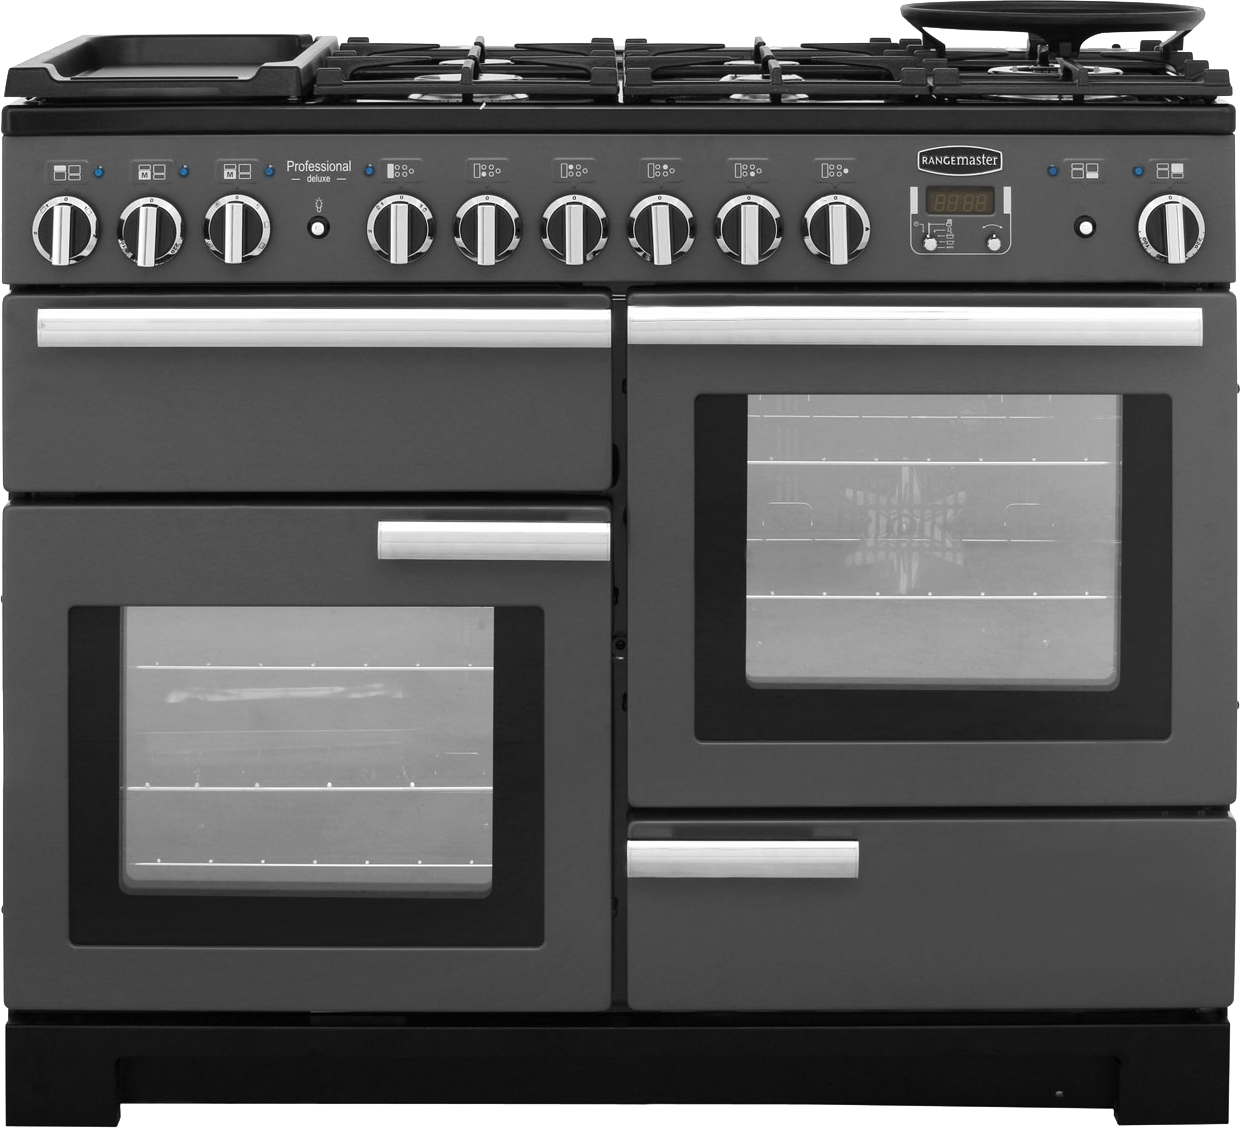 Rangemaster Professional Deluxe PDL110DFFSL/C 110cm Dual Fuel Range Cooker - Slate - A/A Rated, Graphite